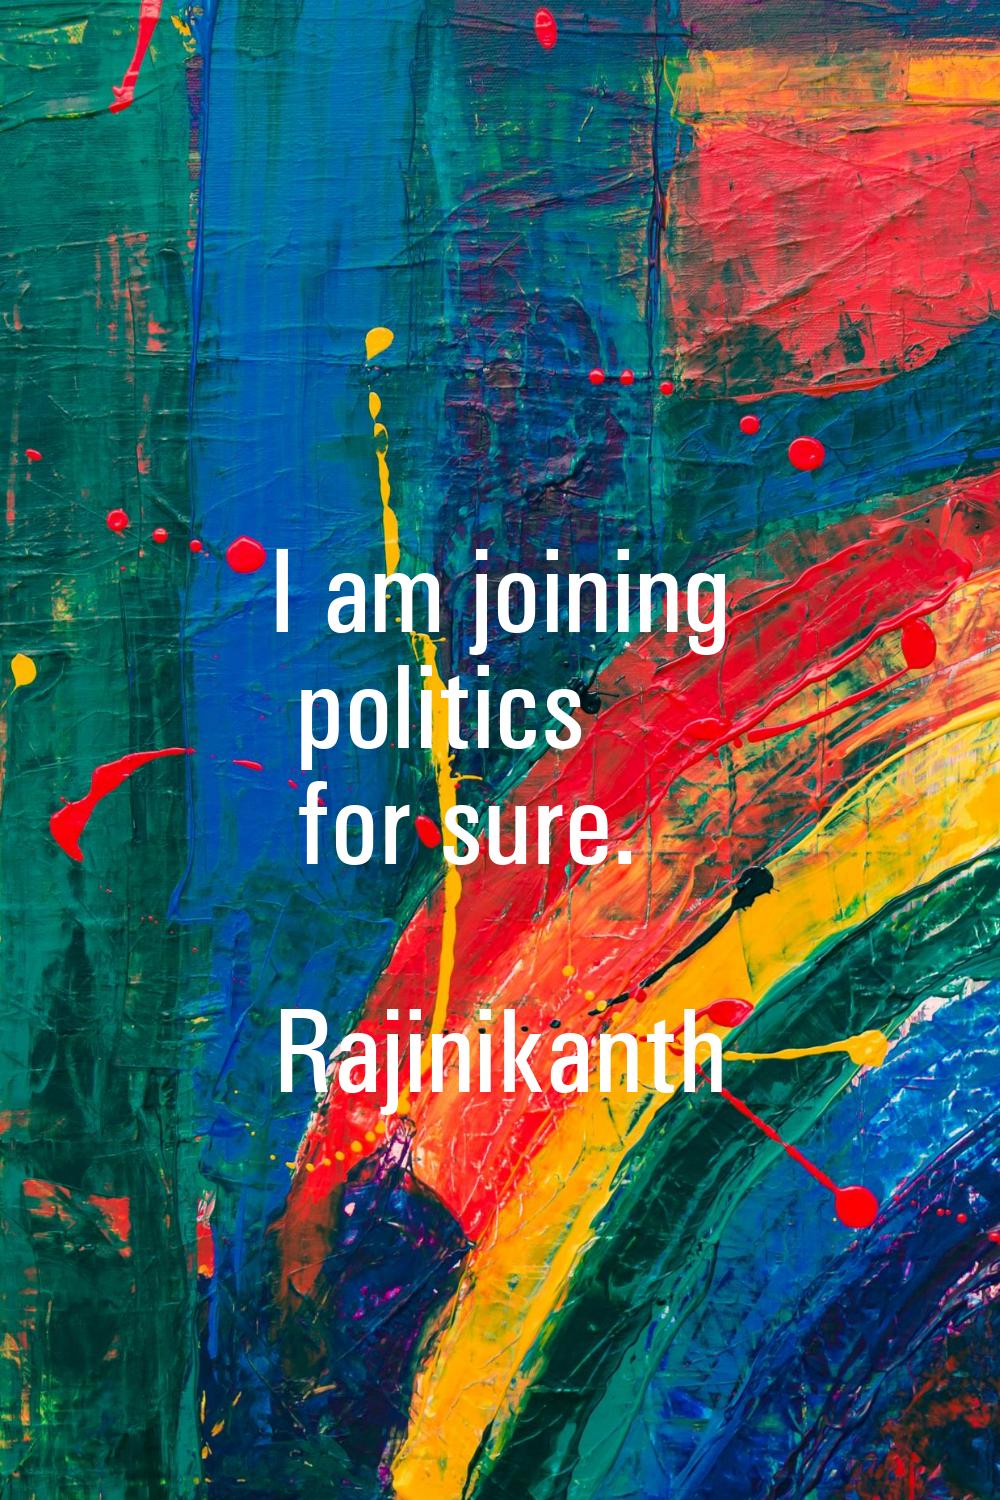 I am joining politics for sure.